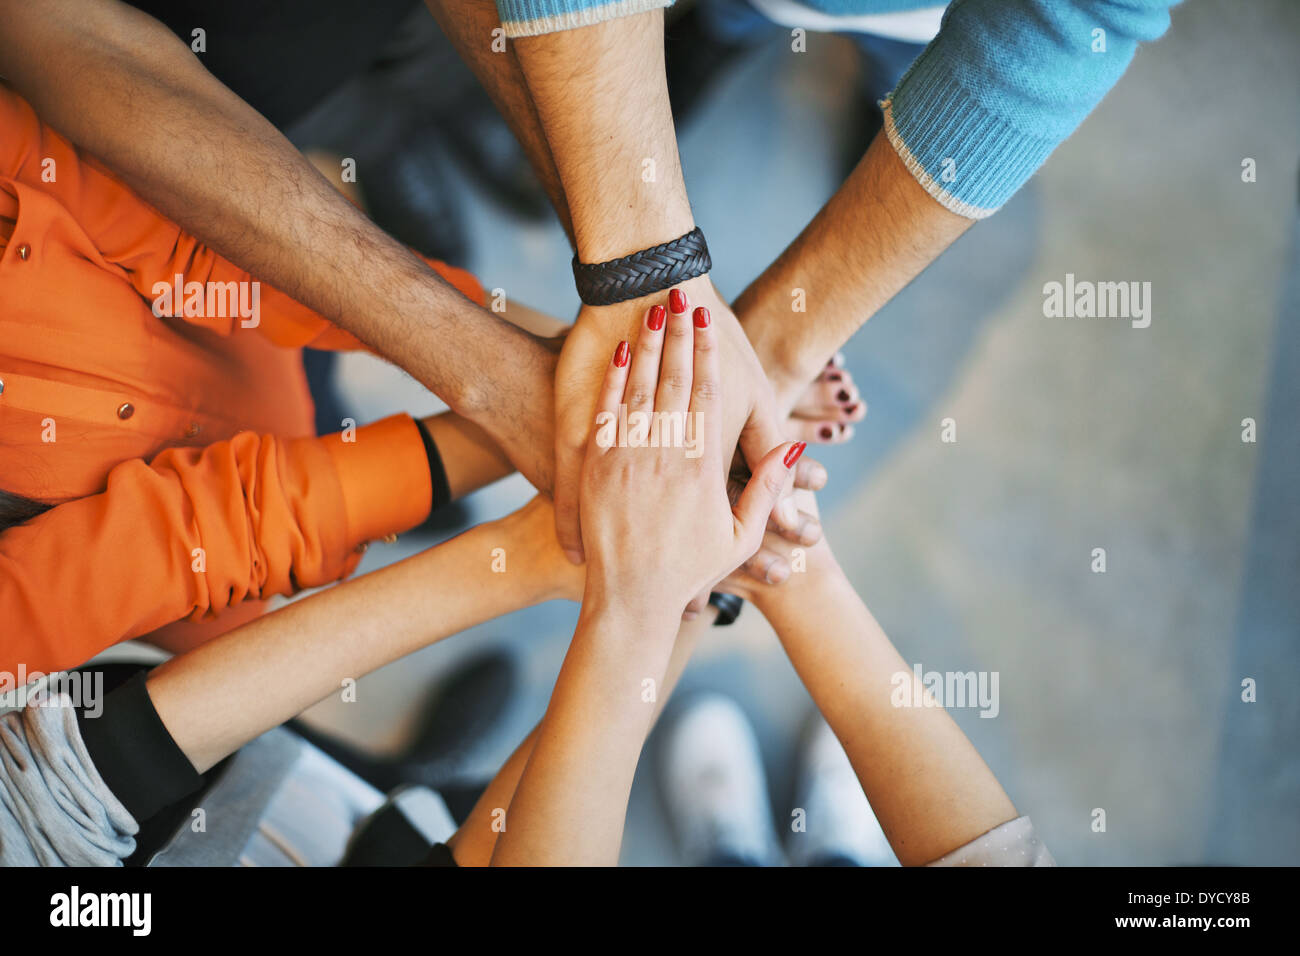 Closeup of stack of hands. Young college students putting their hands on top of each other symbolizing unity and teamwork. Stock Photo